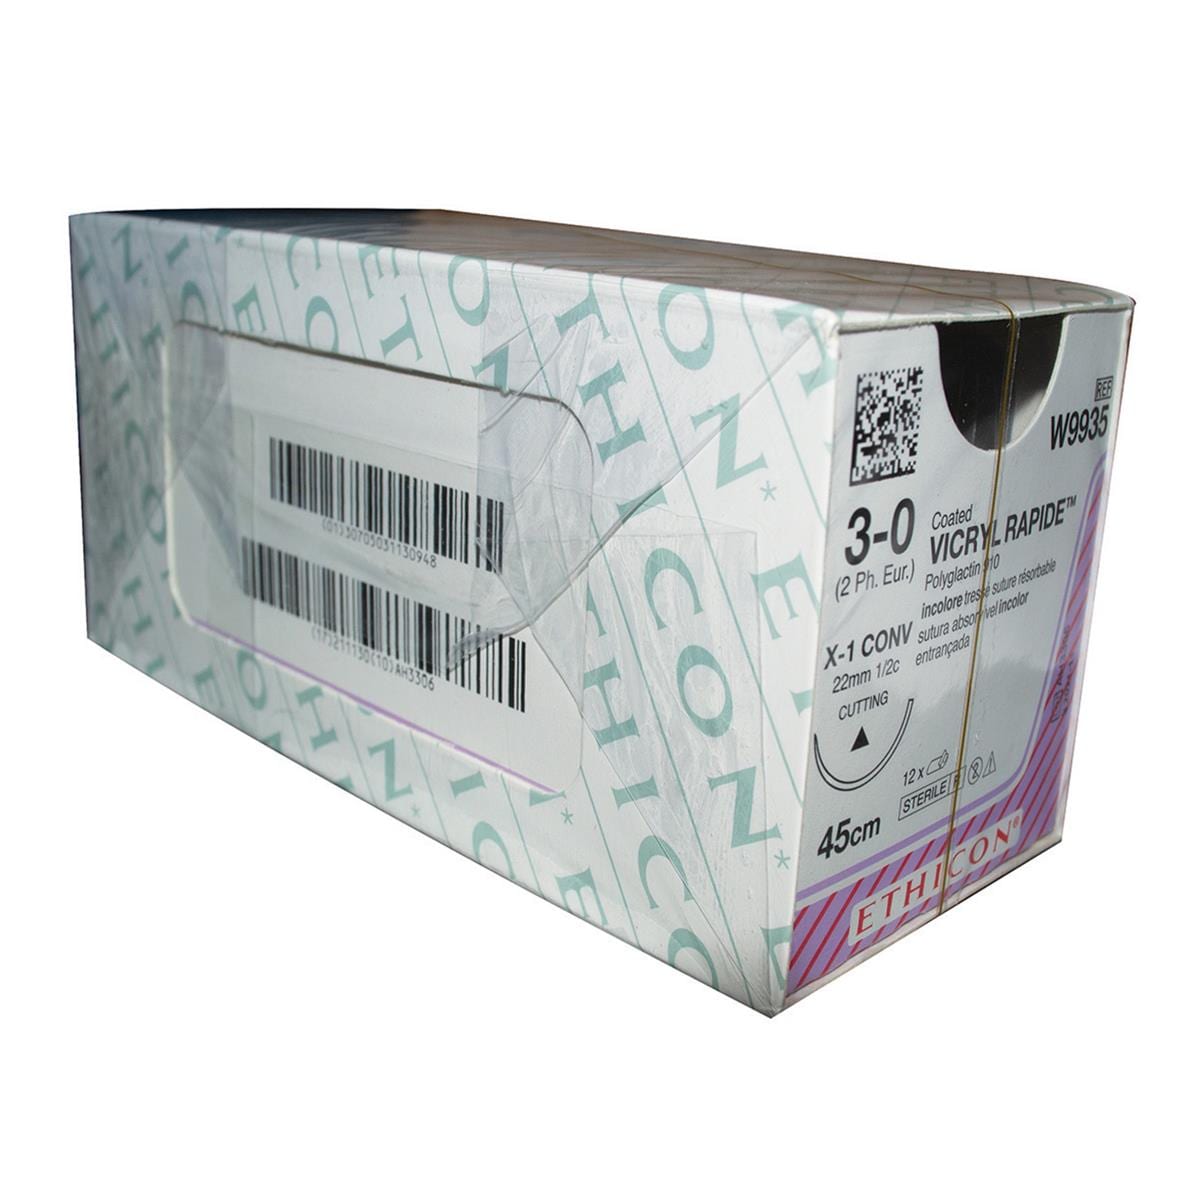 Vicryl Rapide Suture Undyed Coated 45cm 3-0 1/2 Circle Conventional Cutting X-1 CONV 22mm 12pk